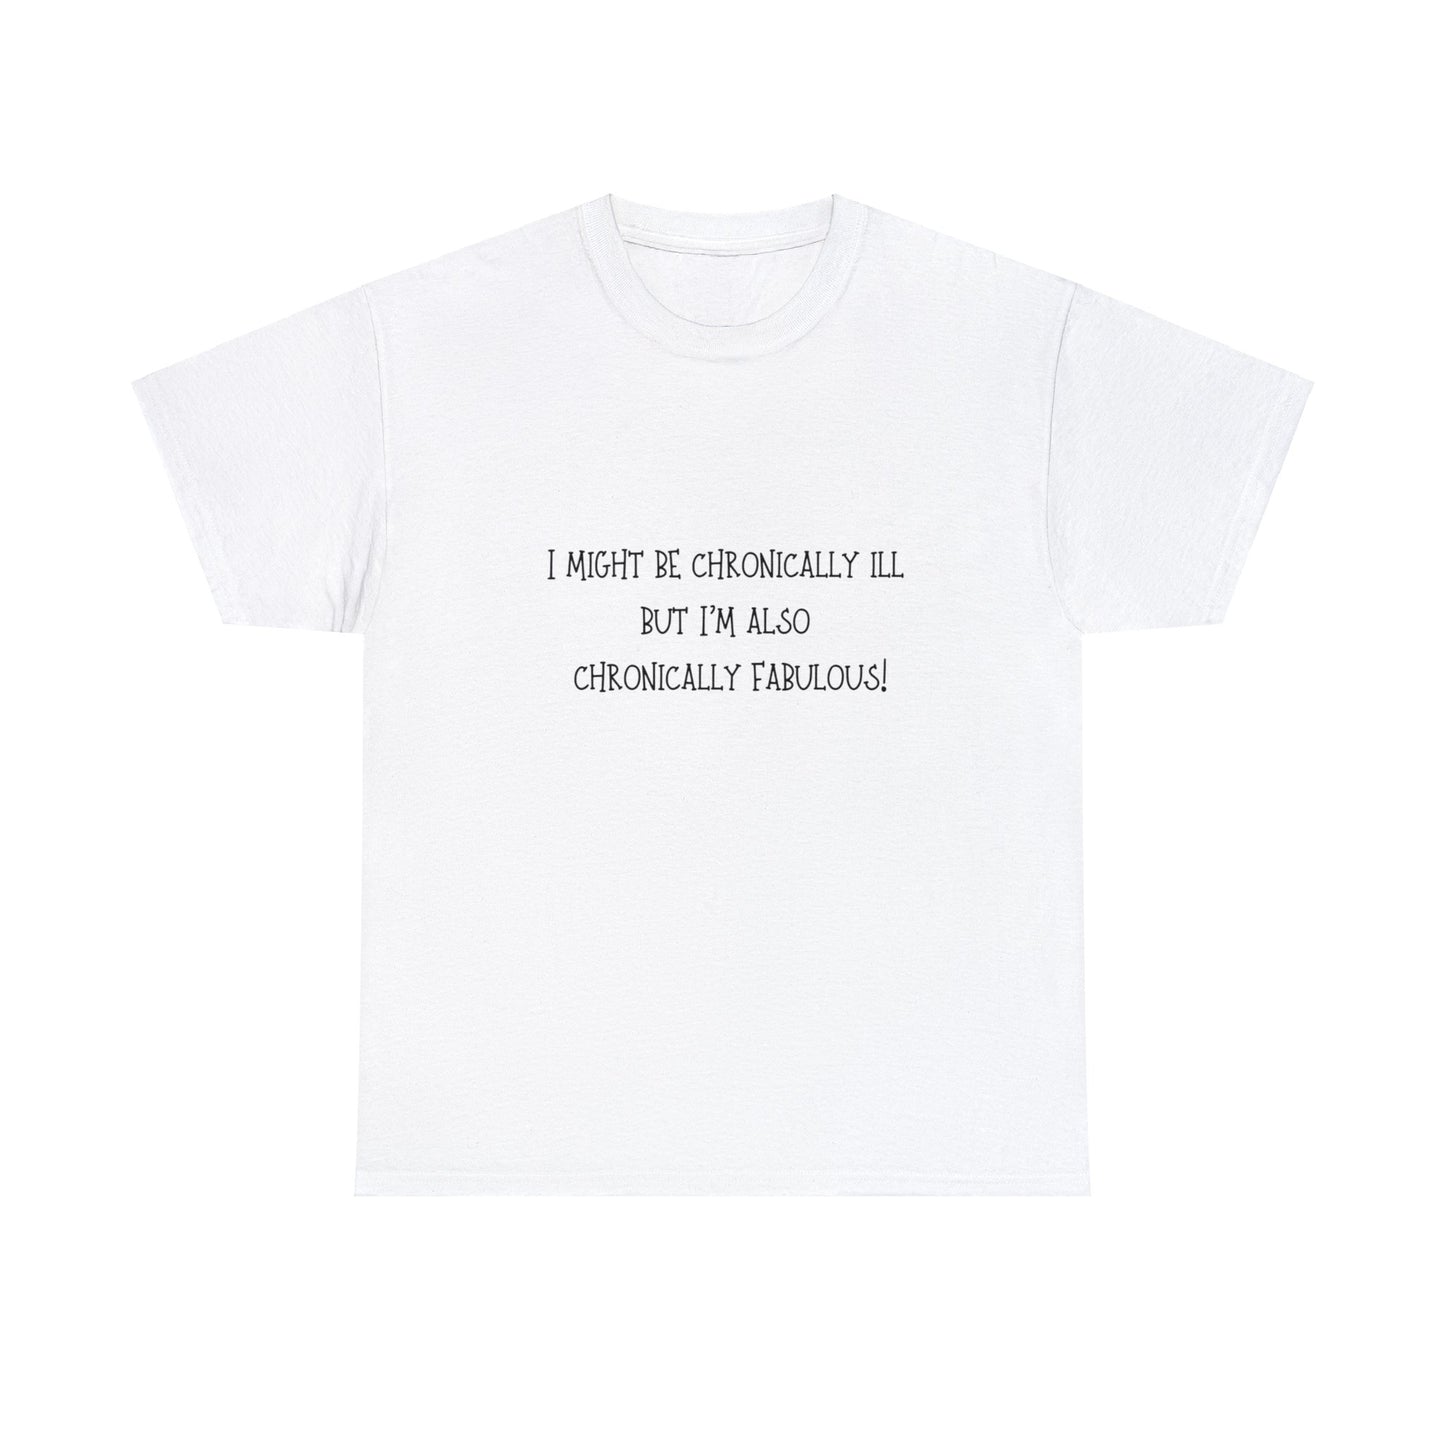 I Might Be Chronically Ill But I’m Also Chronically Fabulous! T-Shirt